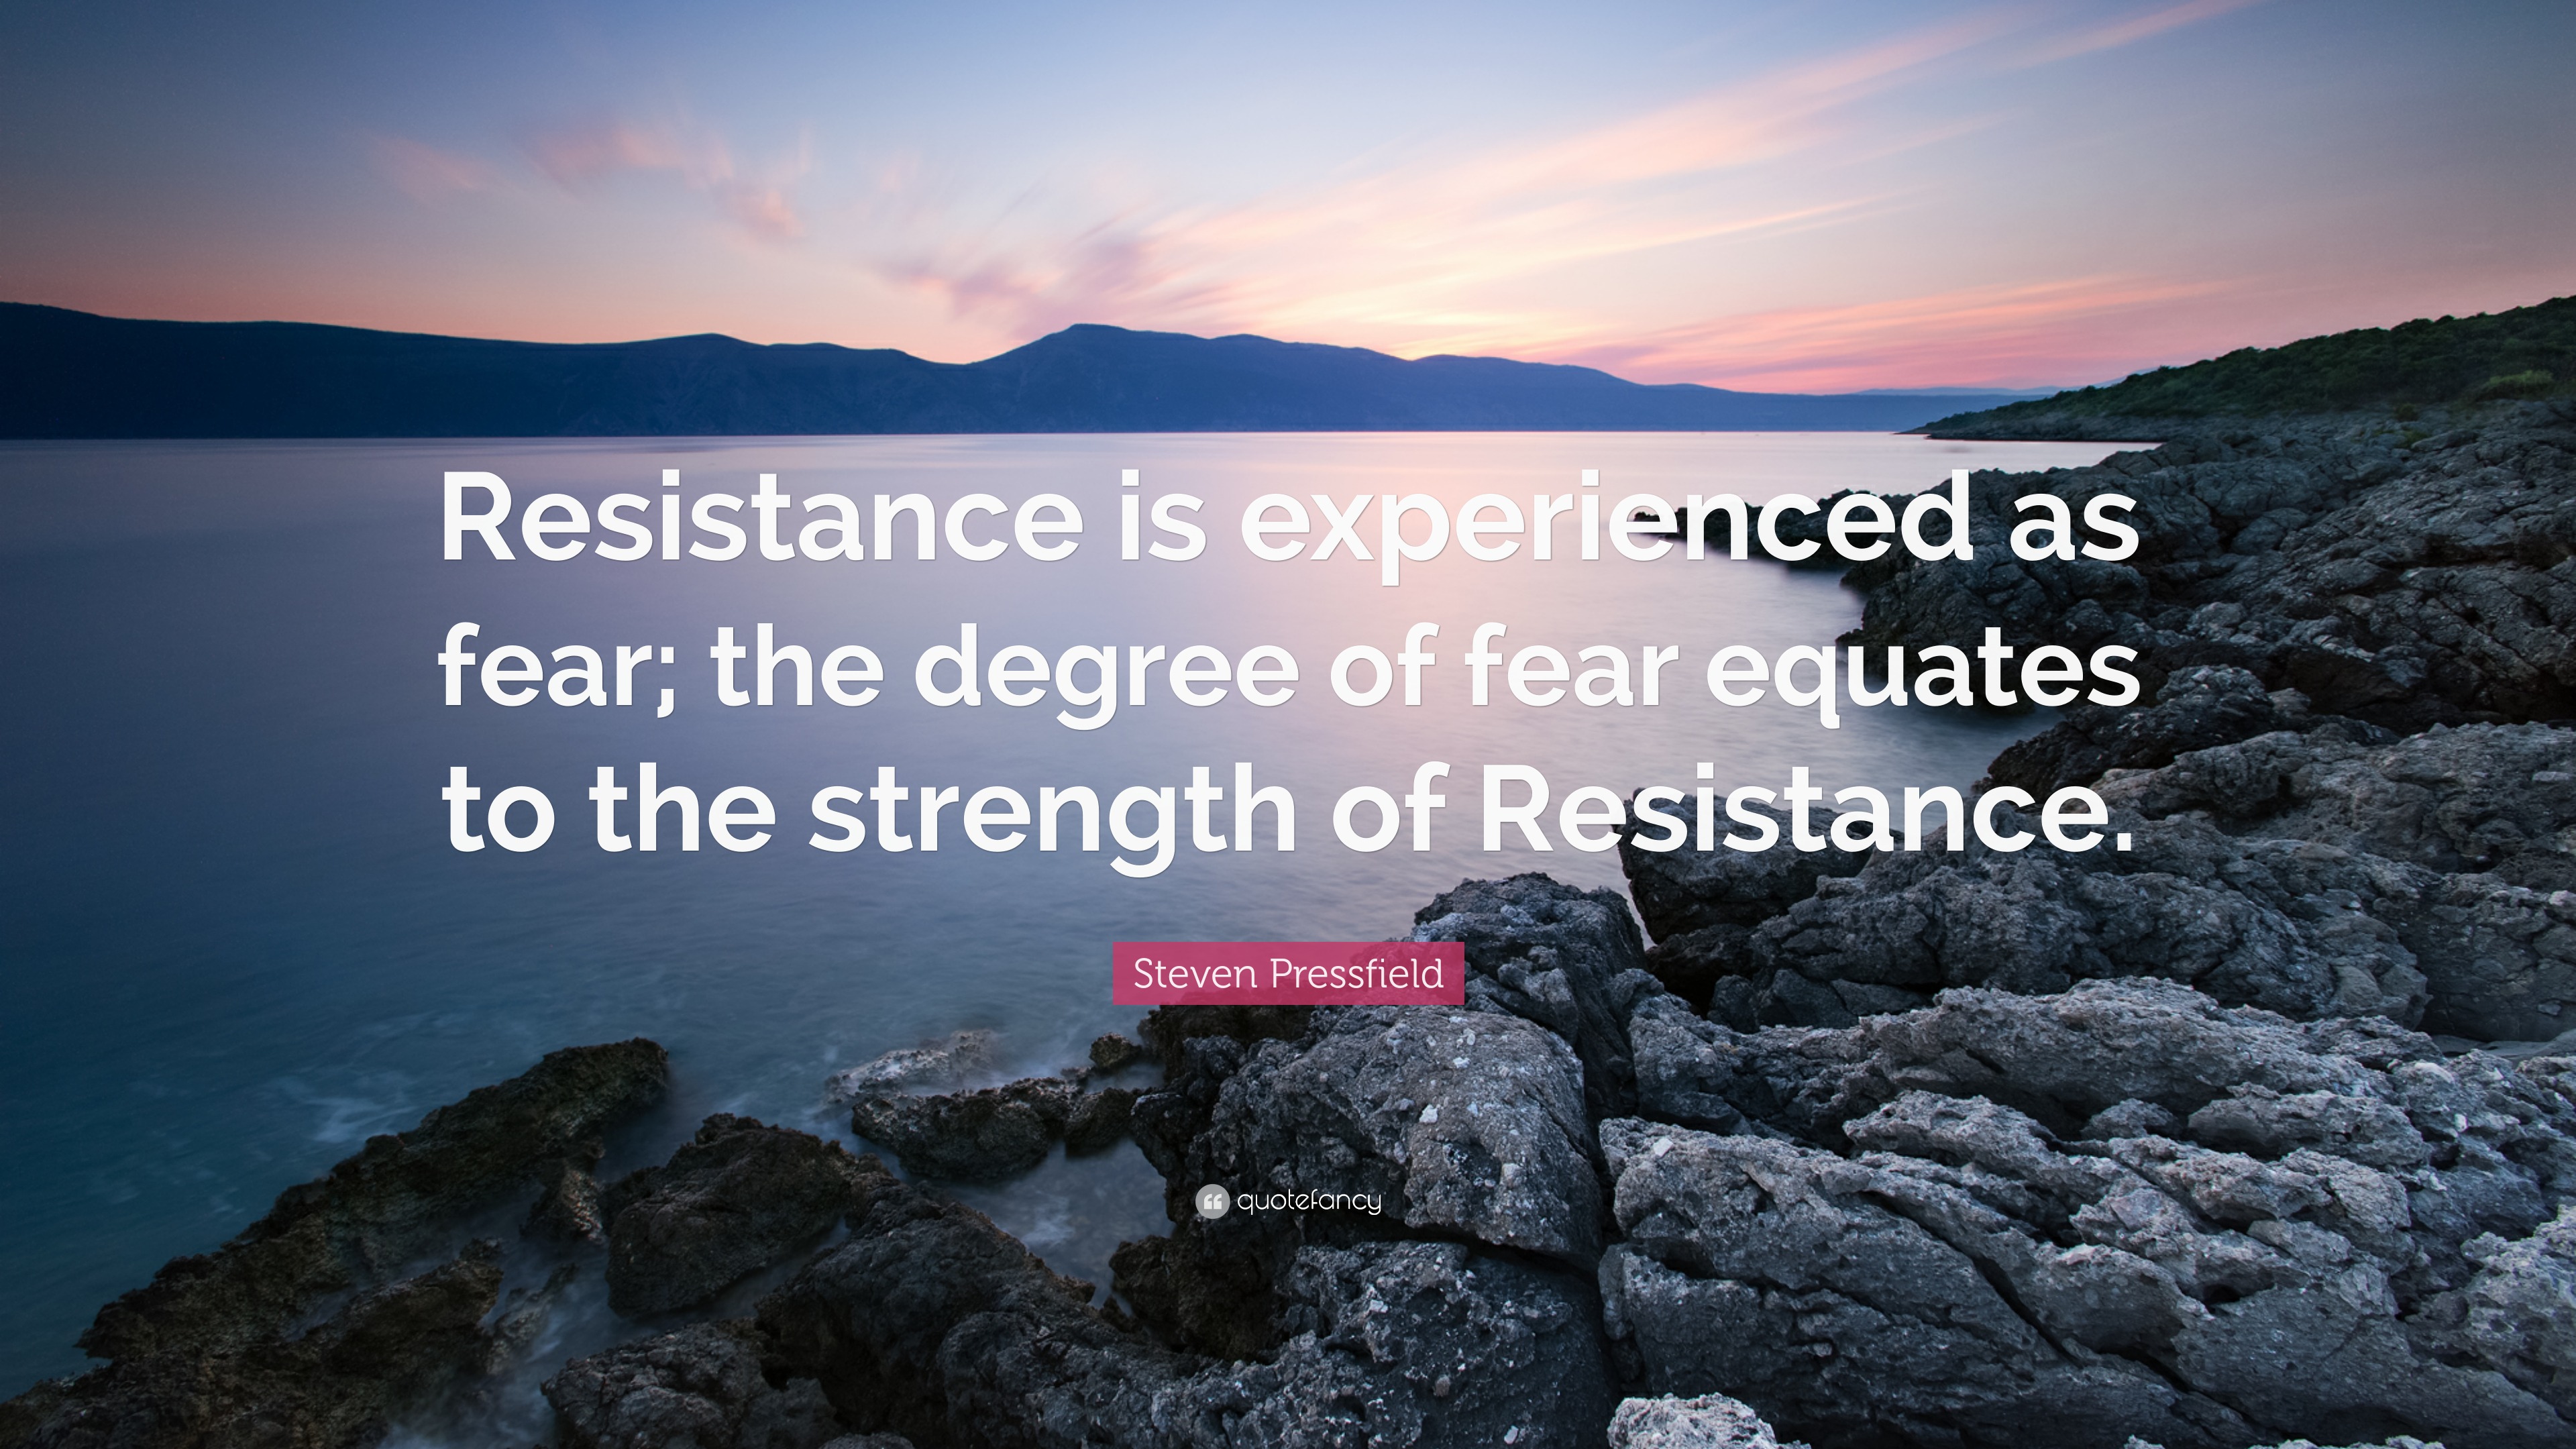 Steven Pressfield Quote: “Resistance is experienced as fear; the degree ...